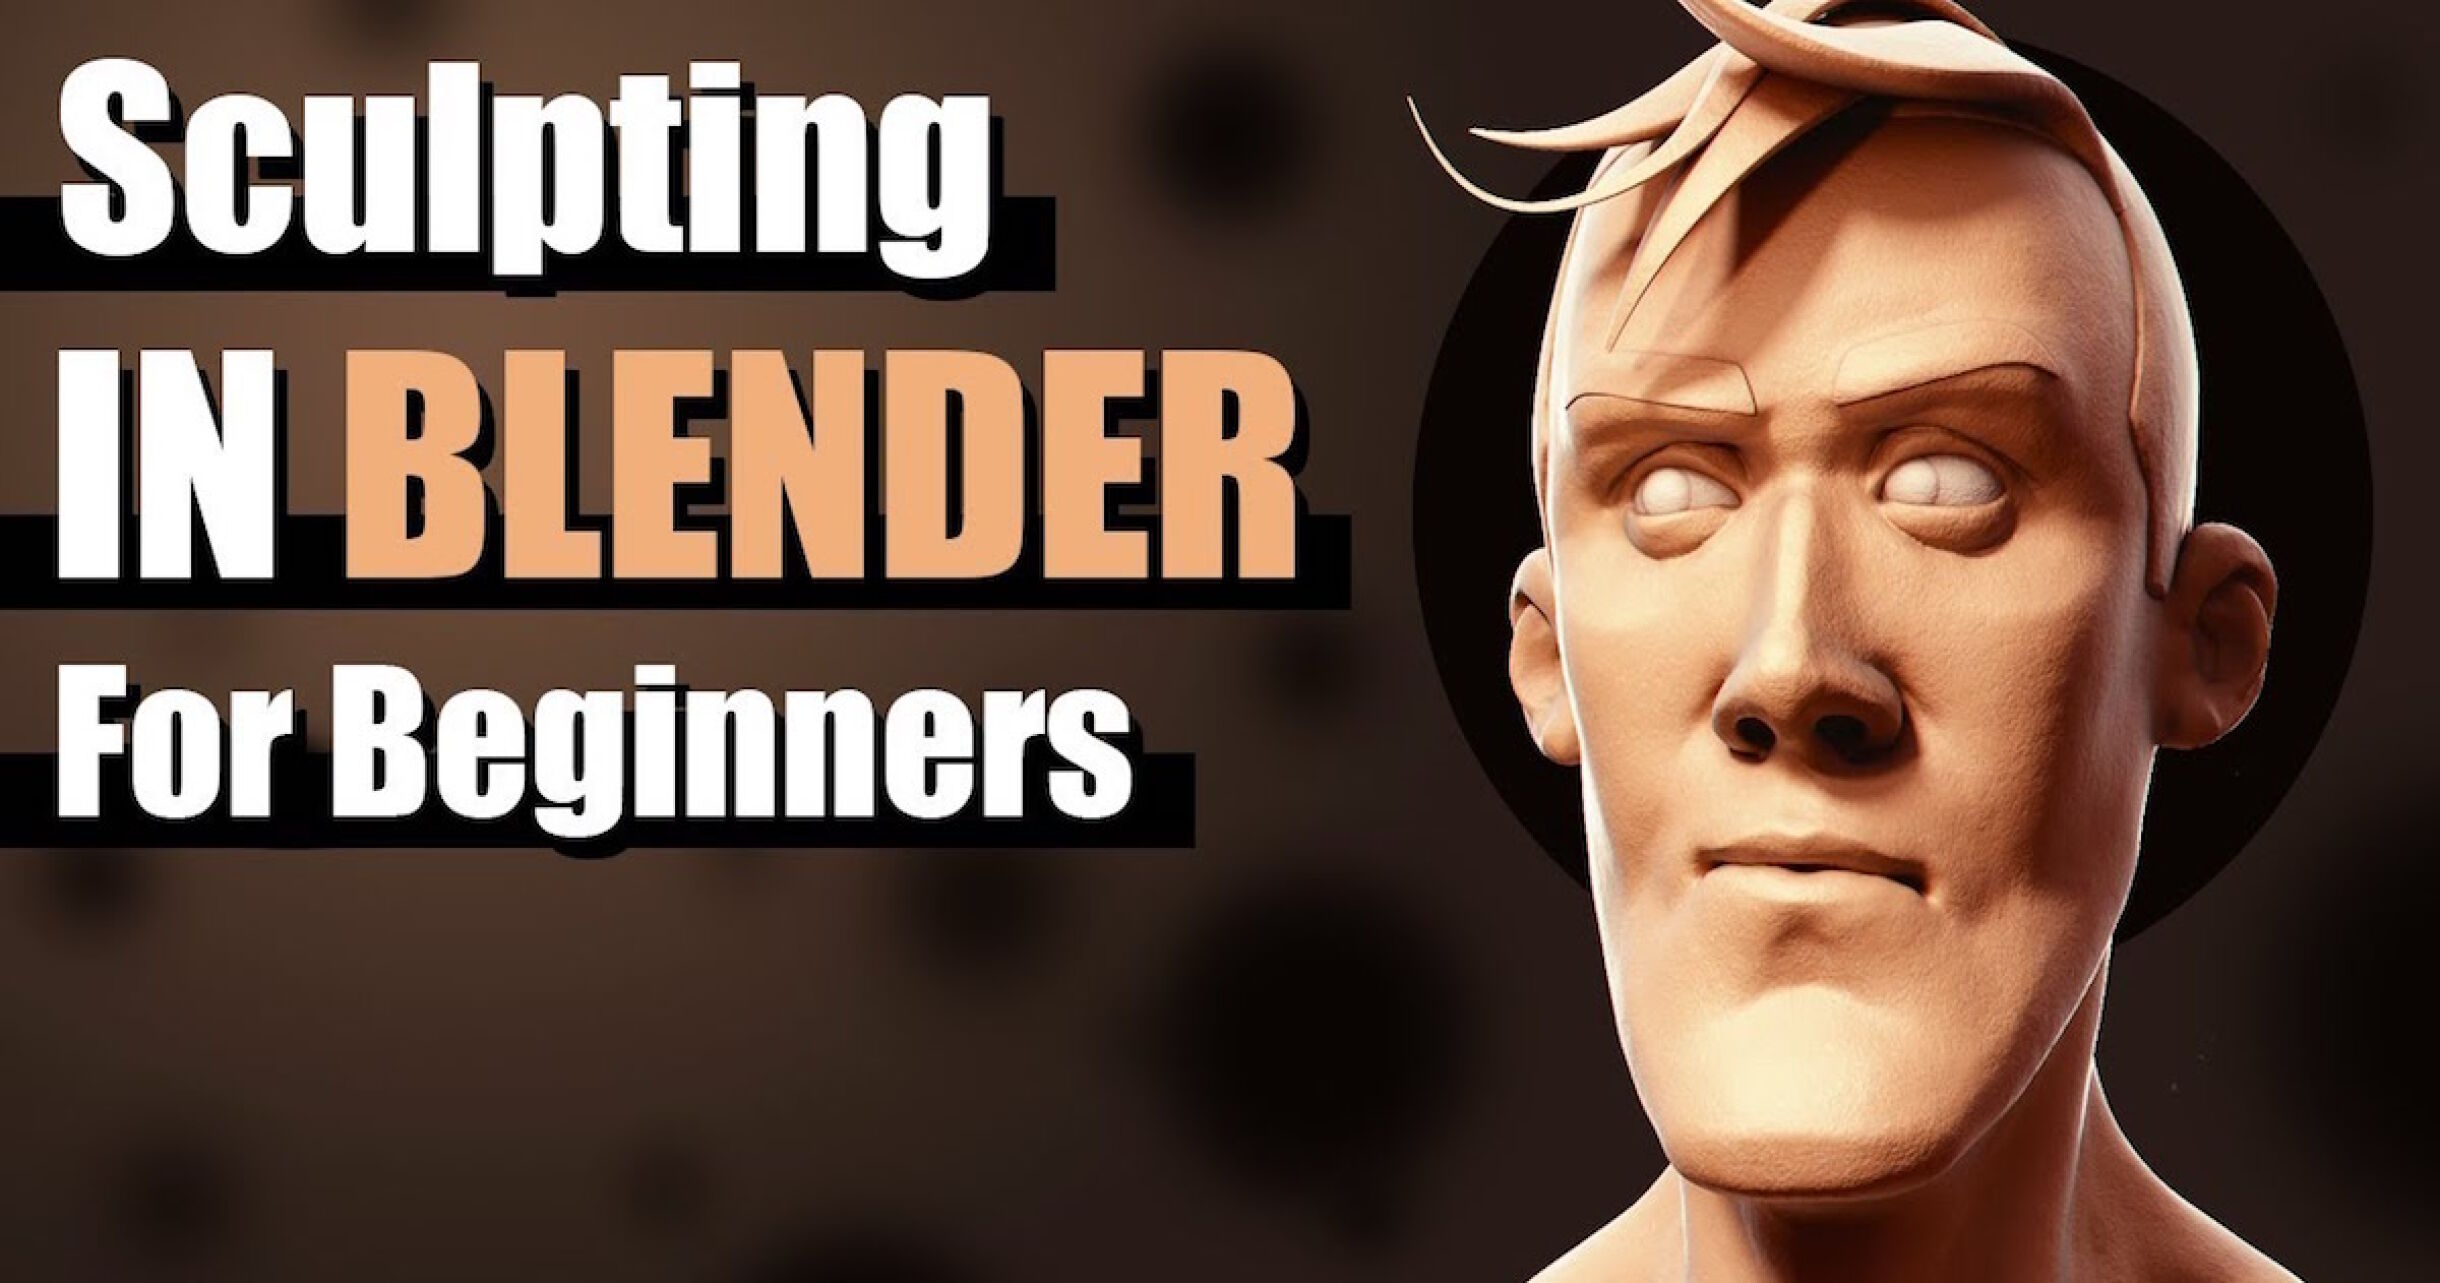 A Beginner's Guide to Sculpting in